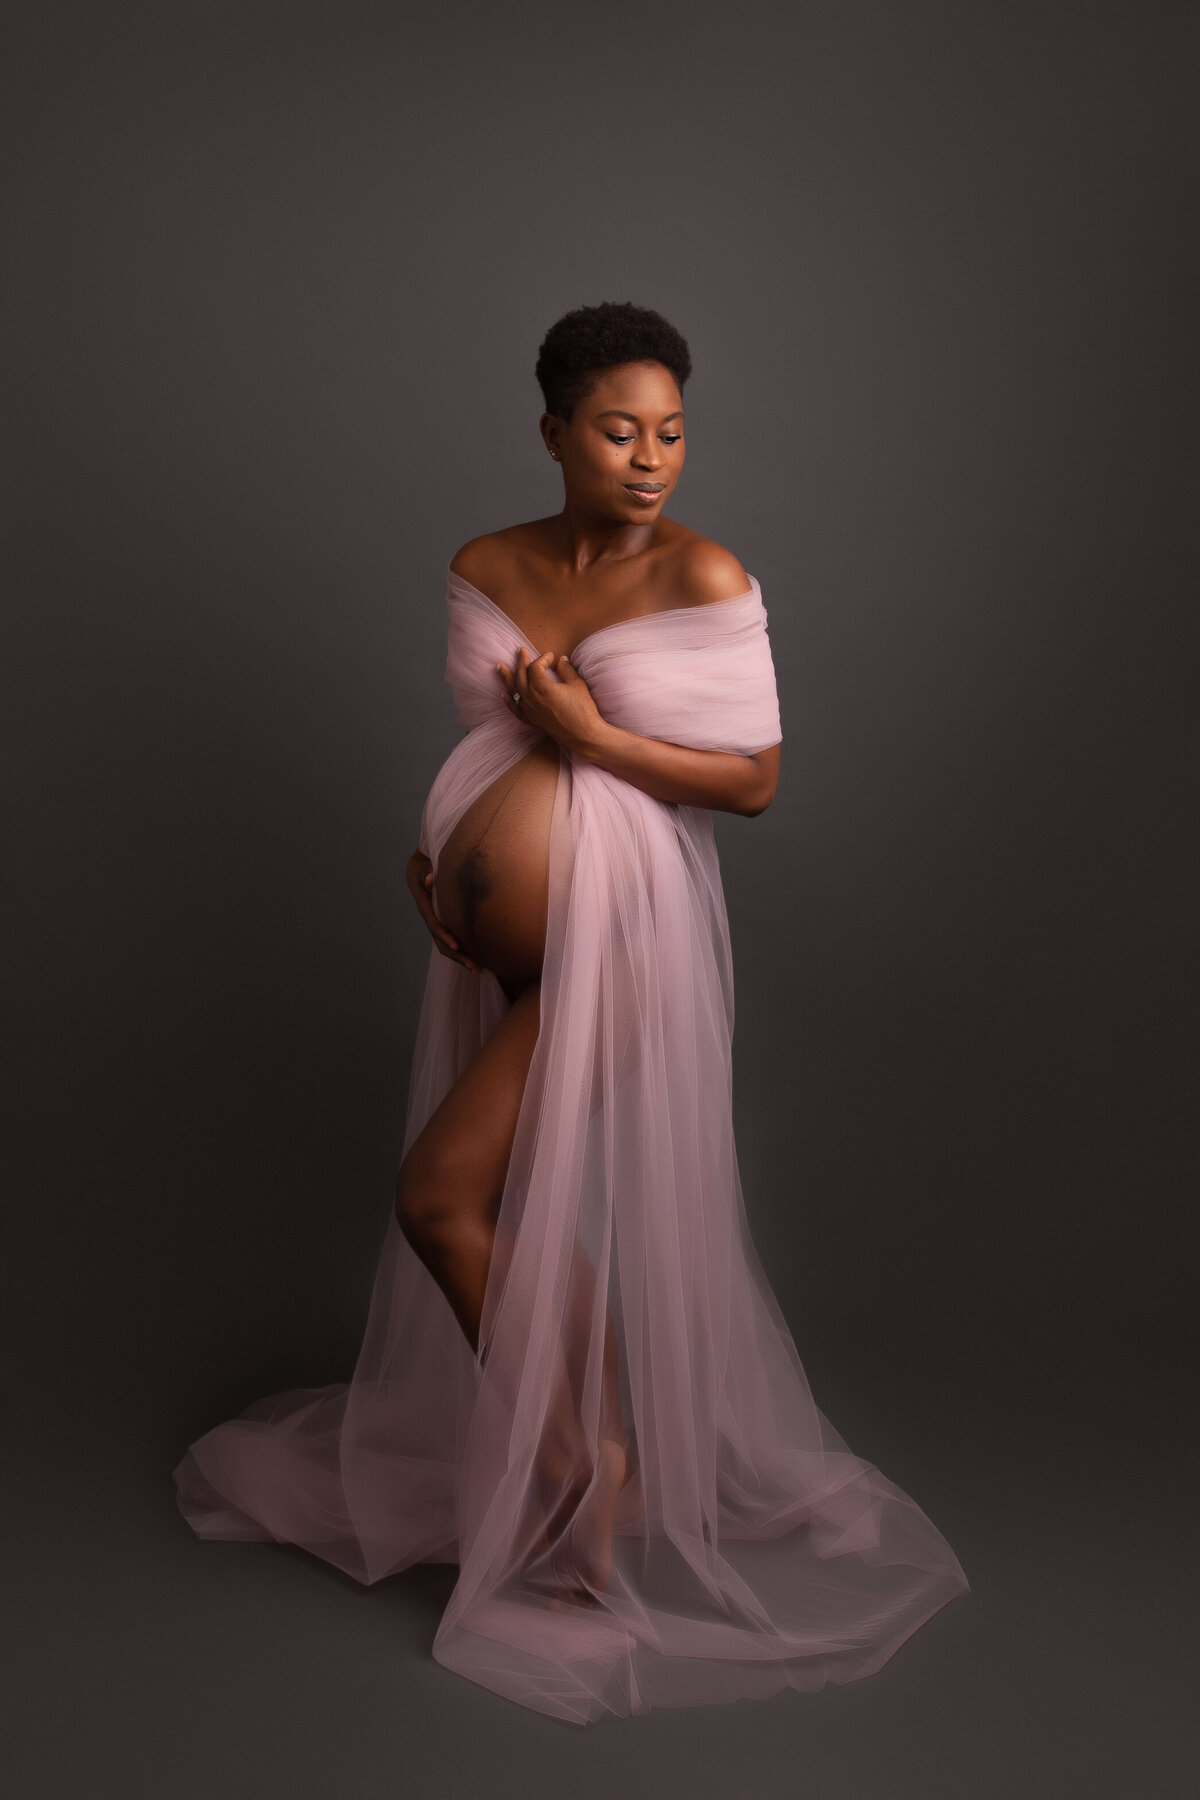 London studio maternity portrait of a woman draped in pink tulle fabric on a grey background.